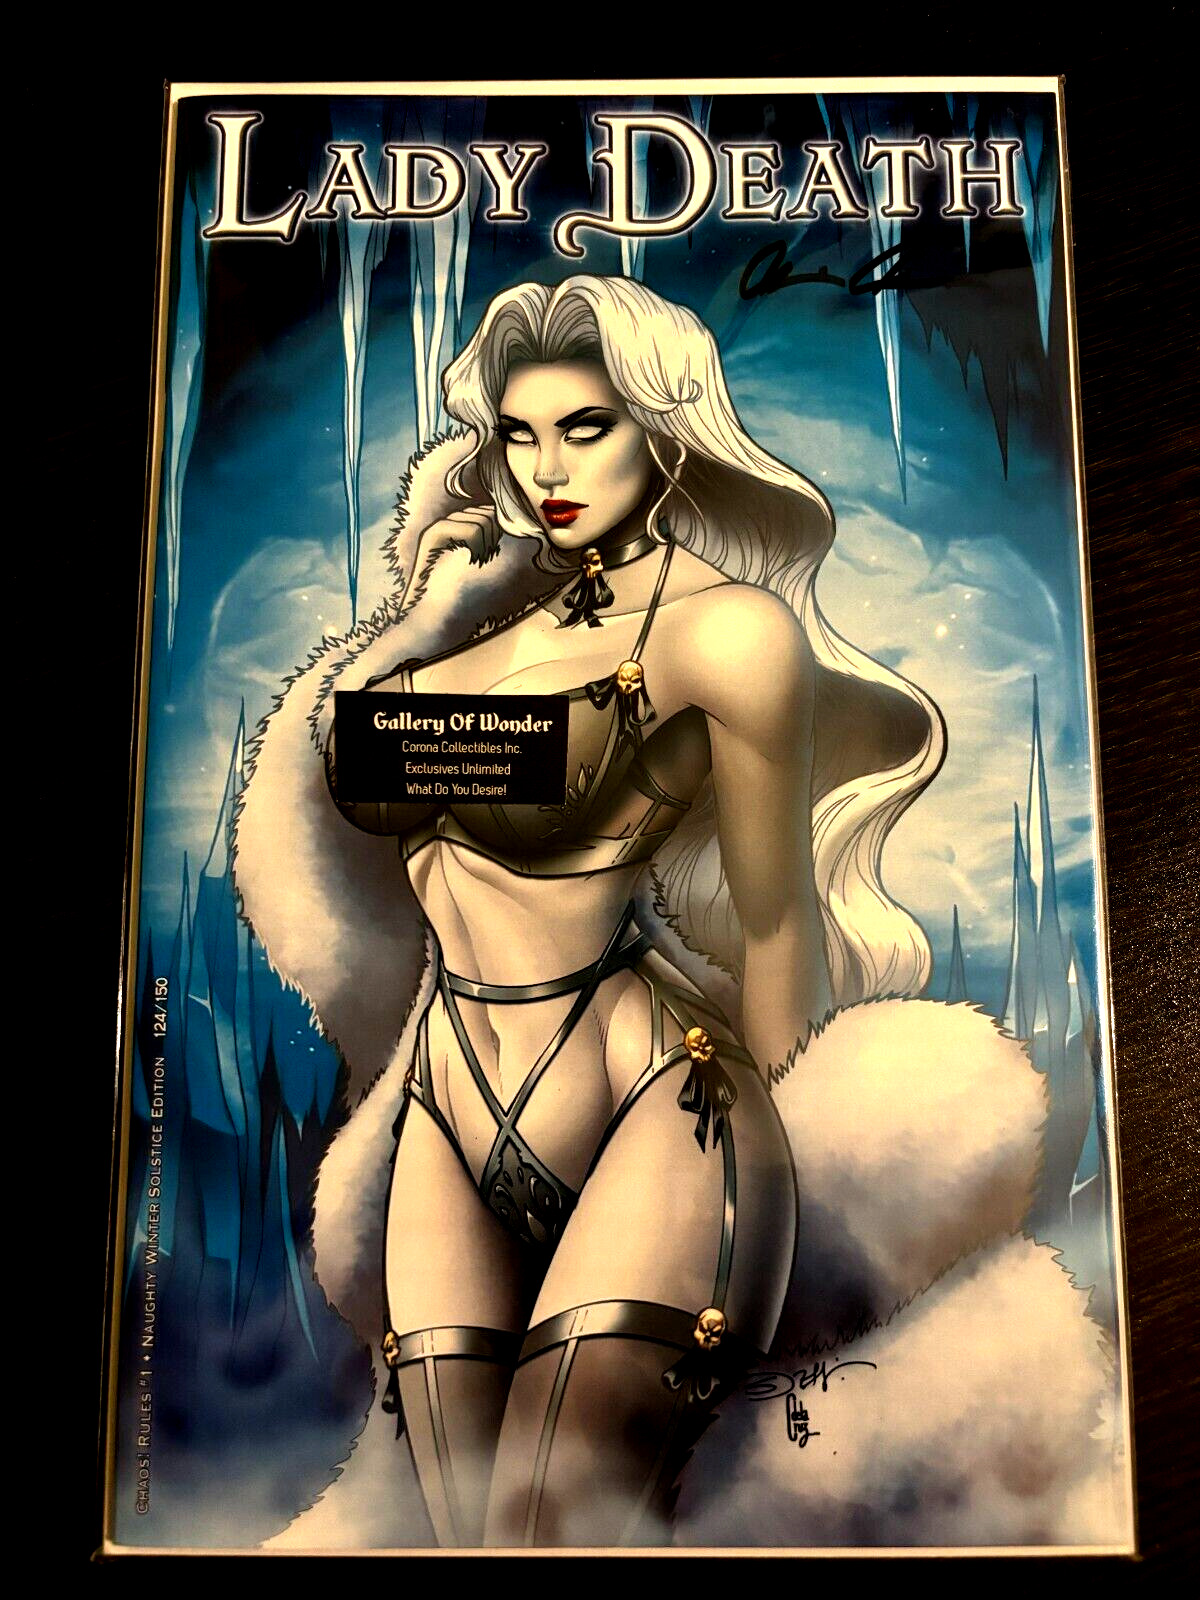 LADY DEATH #1 CHAOS RULES WINTER SOLSTICE NAUGHTY EDITION SIGNED COA LTD 150 NM+